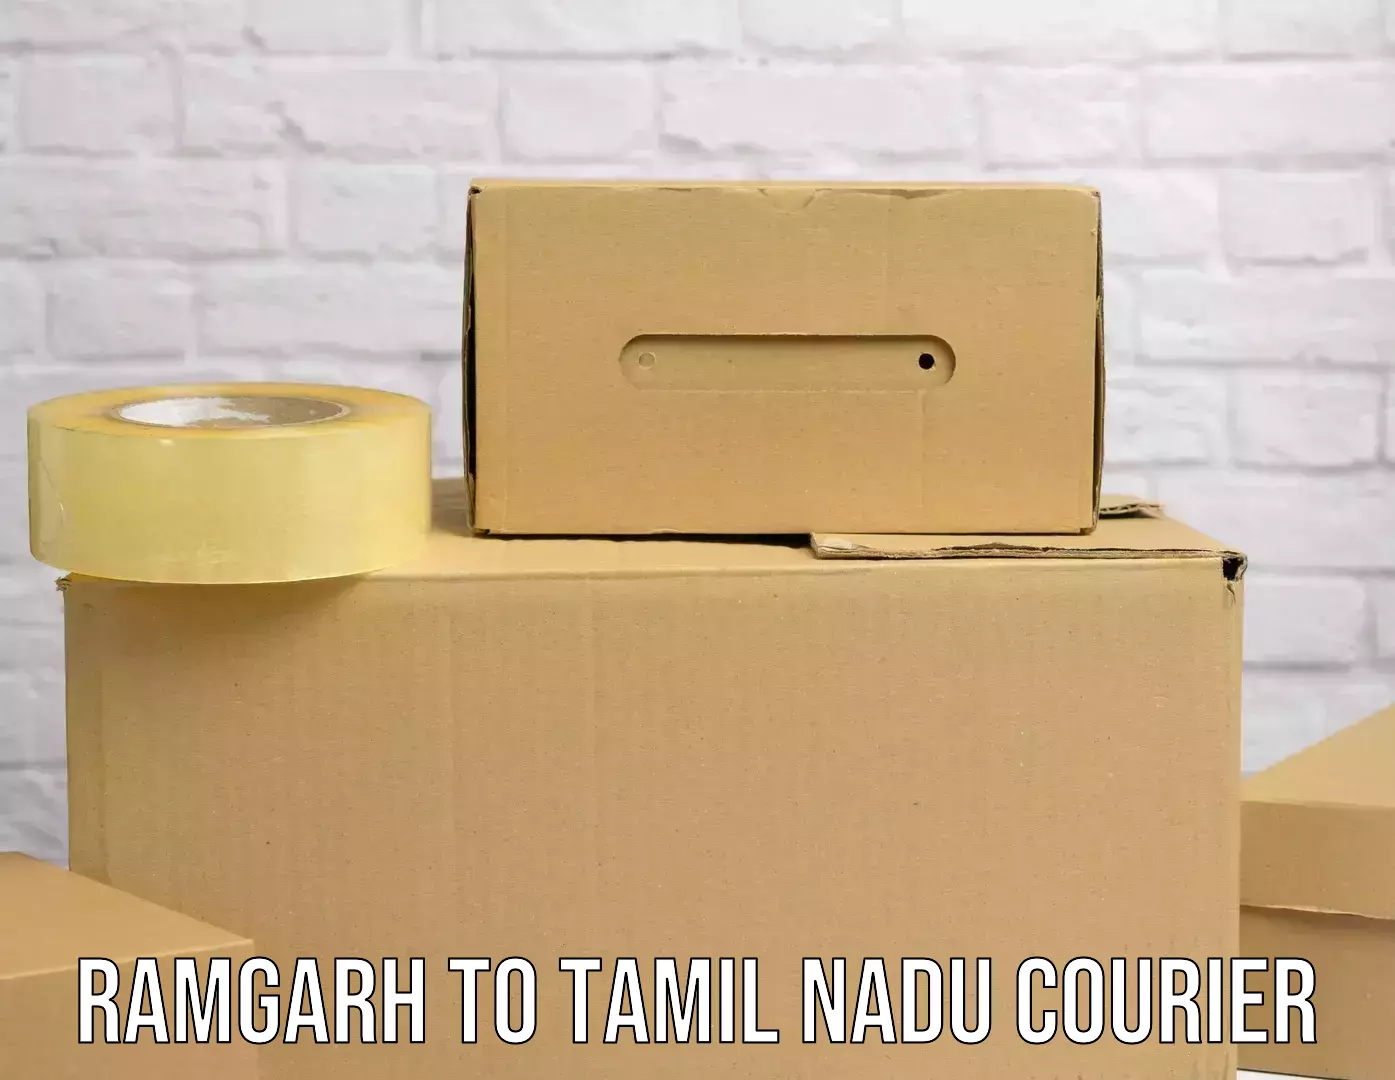 Reliable courier services Ramgarh to Sri Ramachandra Institute of Higher Education and Research Chennai